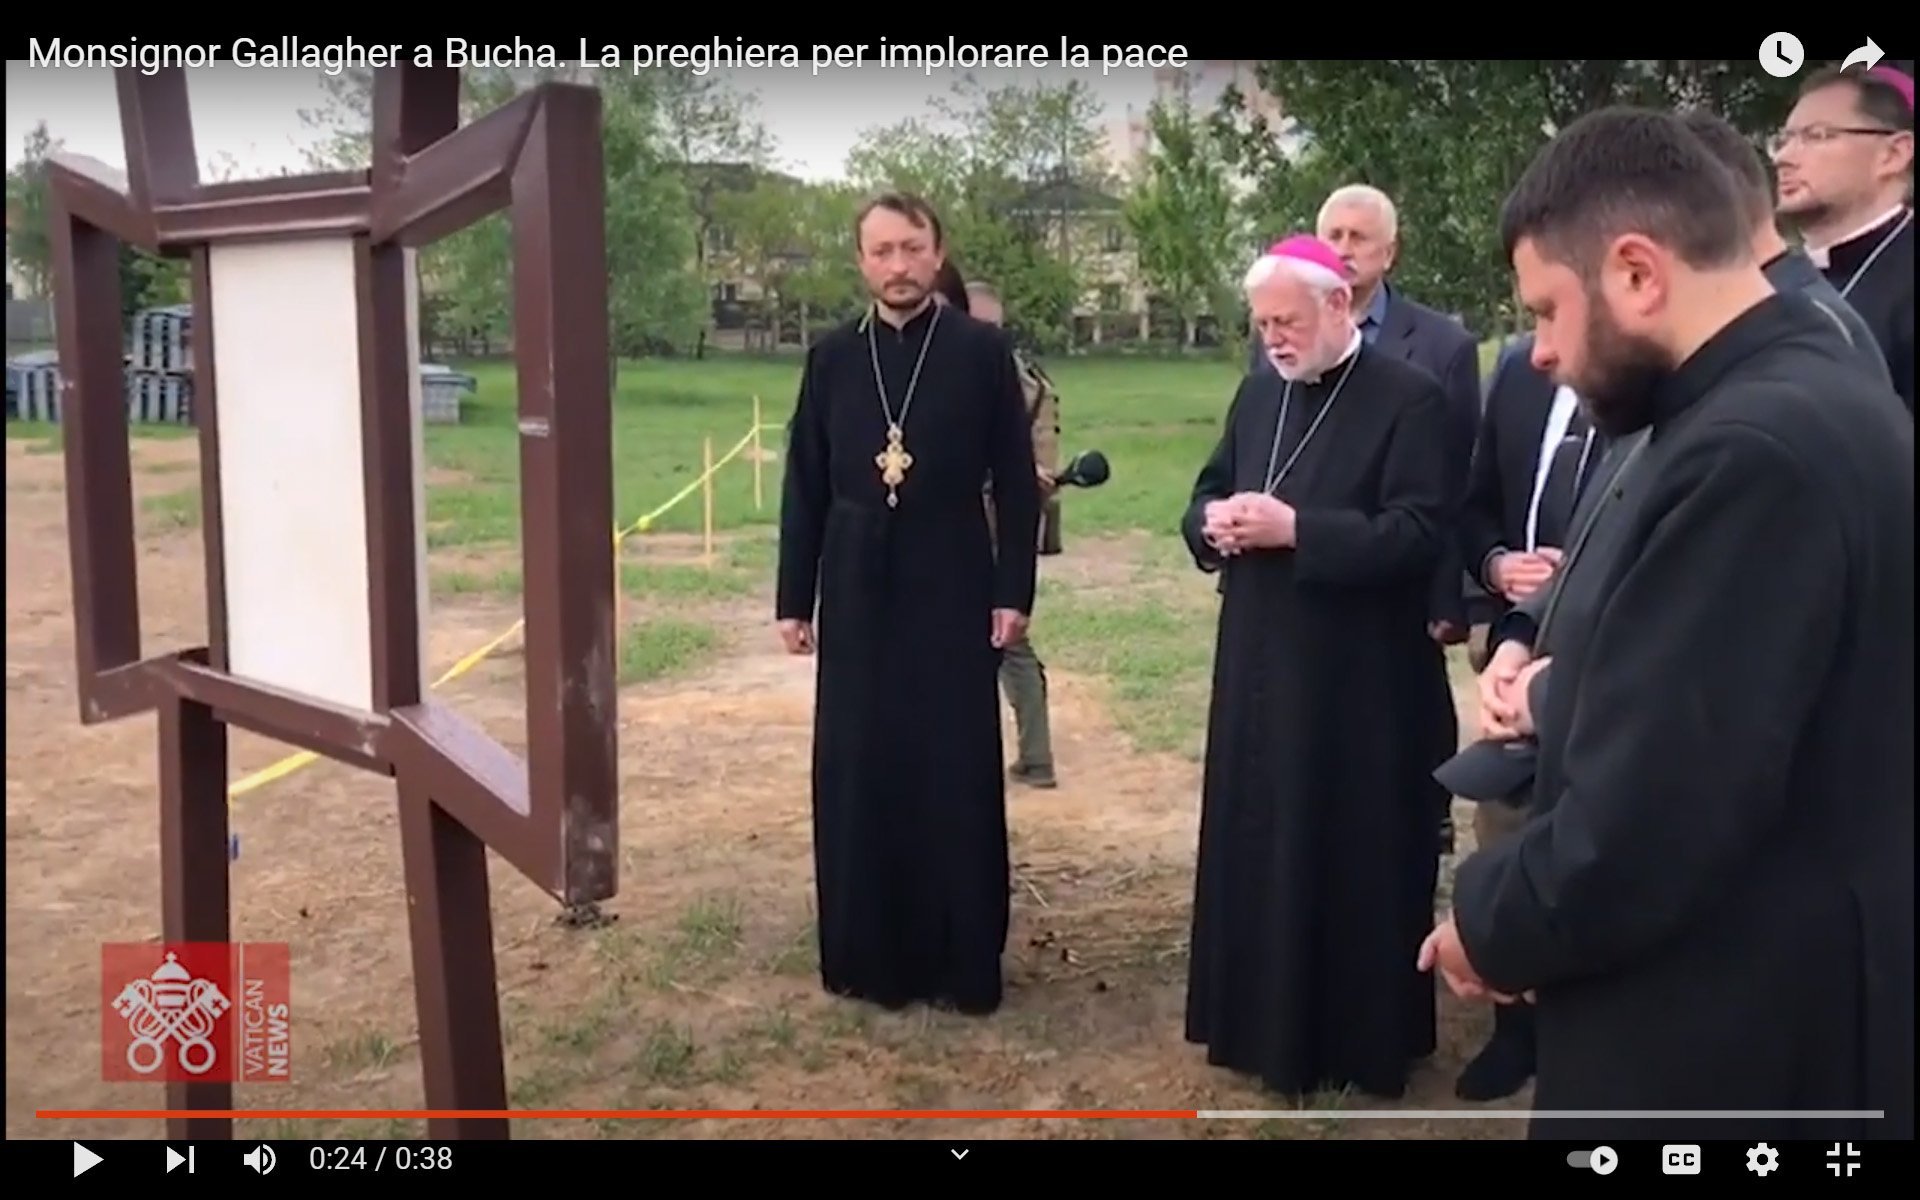 Archbishop Paul R. Gallagher, Vatican foreign minister, prays at the site of a mass grave near the Orthodox Church of St. Andrew in Bucha, Ukraine, May 20, 2022, in this still image taken from video posted by the Vatican. (CNS photo/Vatican Media)